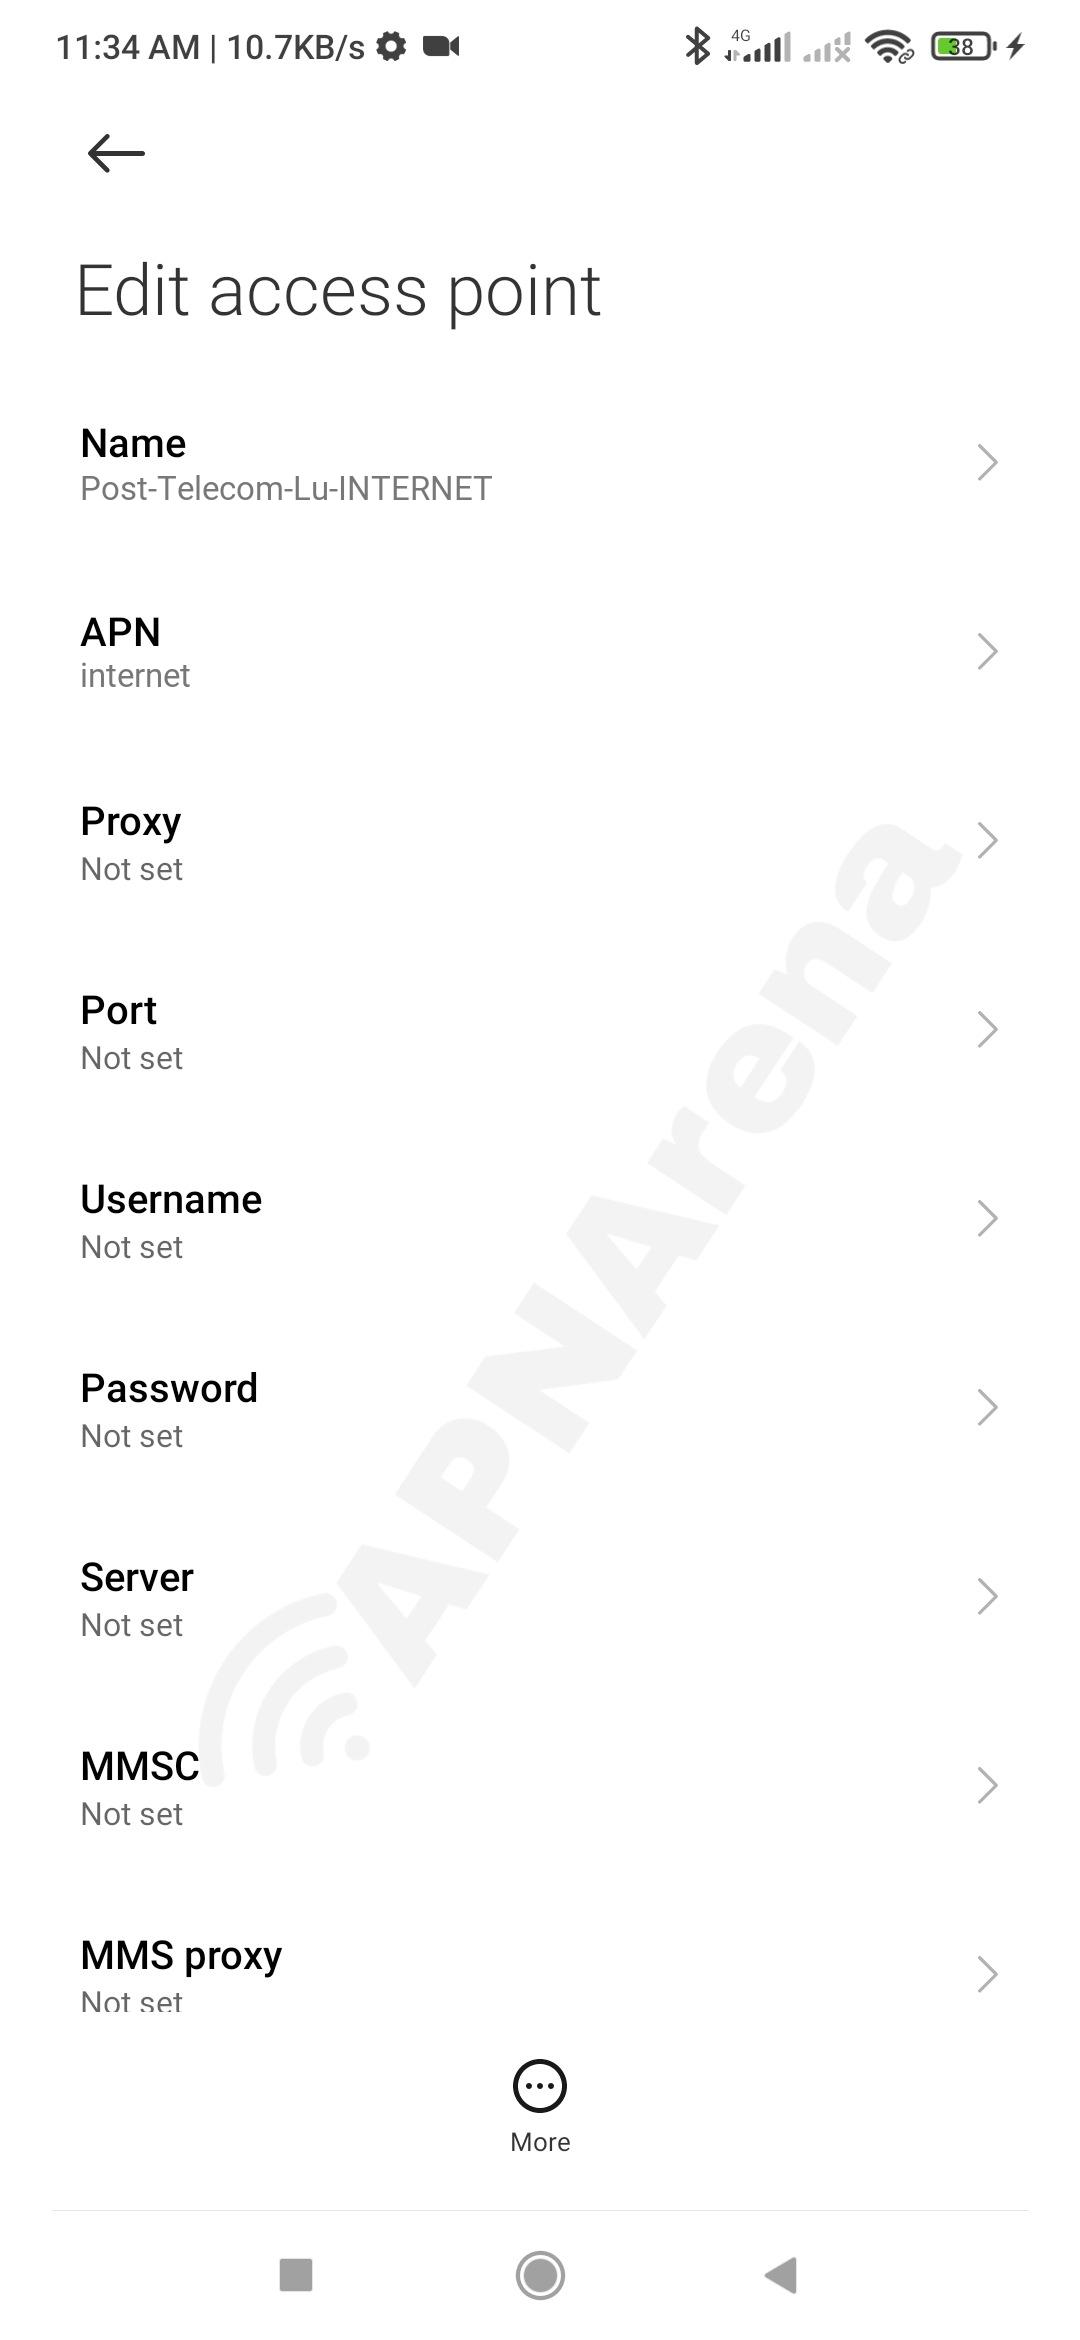 Post Telecom Luxembourg APN Settings for Android